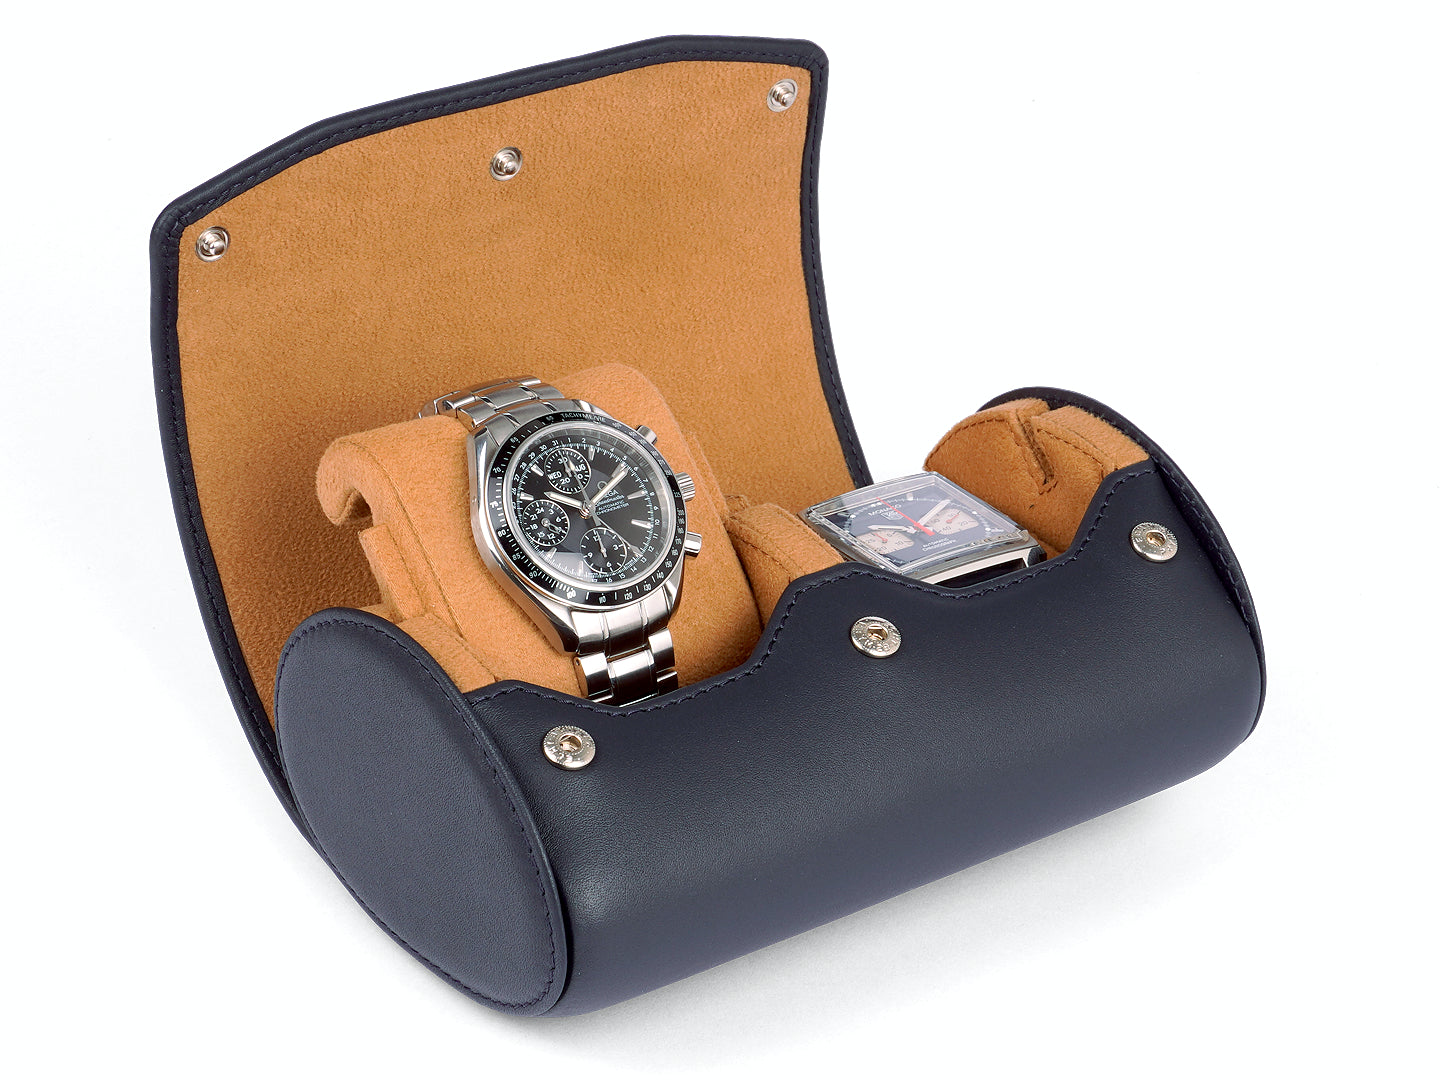 Travel & Storage Watch Case For 2 Watches - With Stand Function